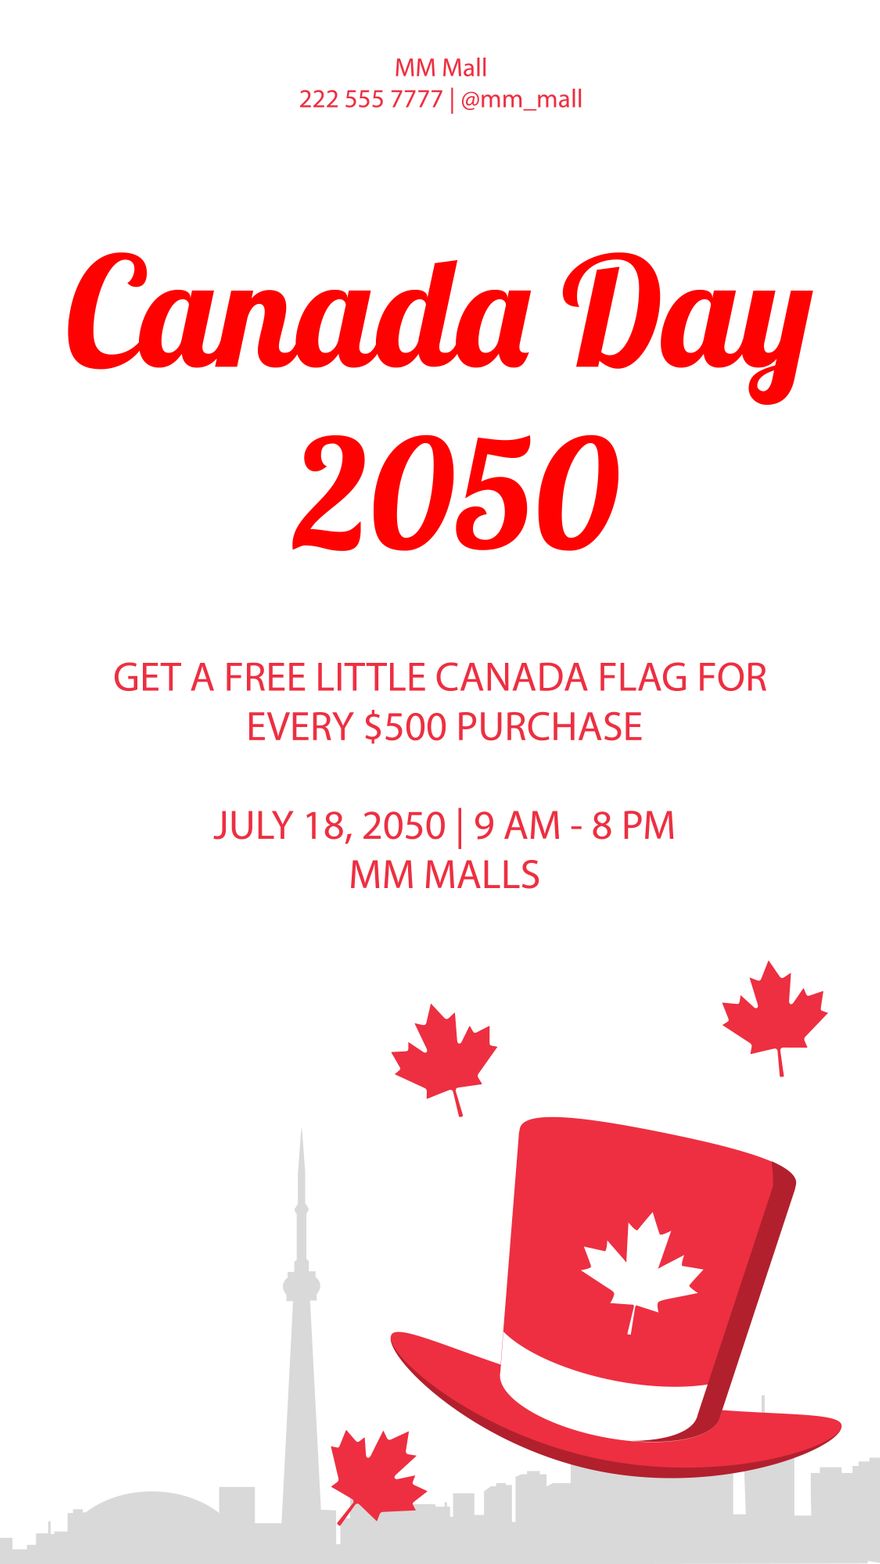 Free Canada Day Flyer Background in PDF, Illustrator, PSD, EPS, SVG, JPG, PNG